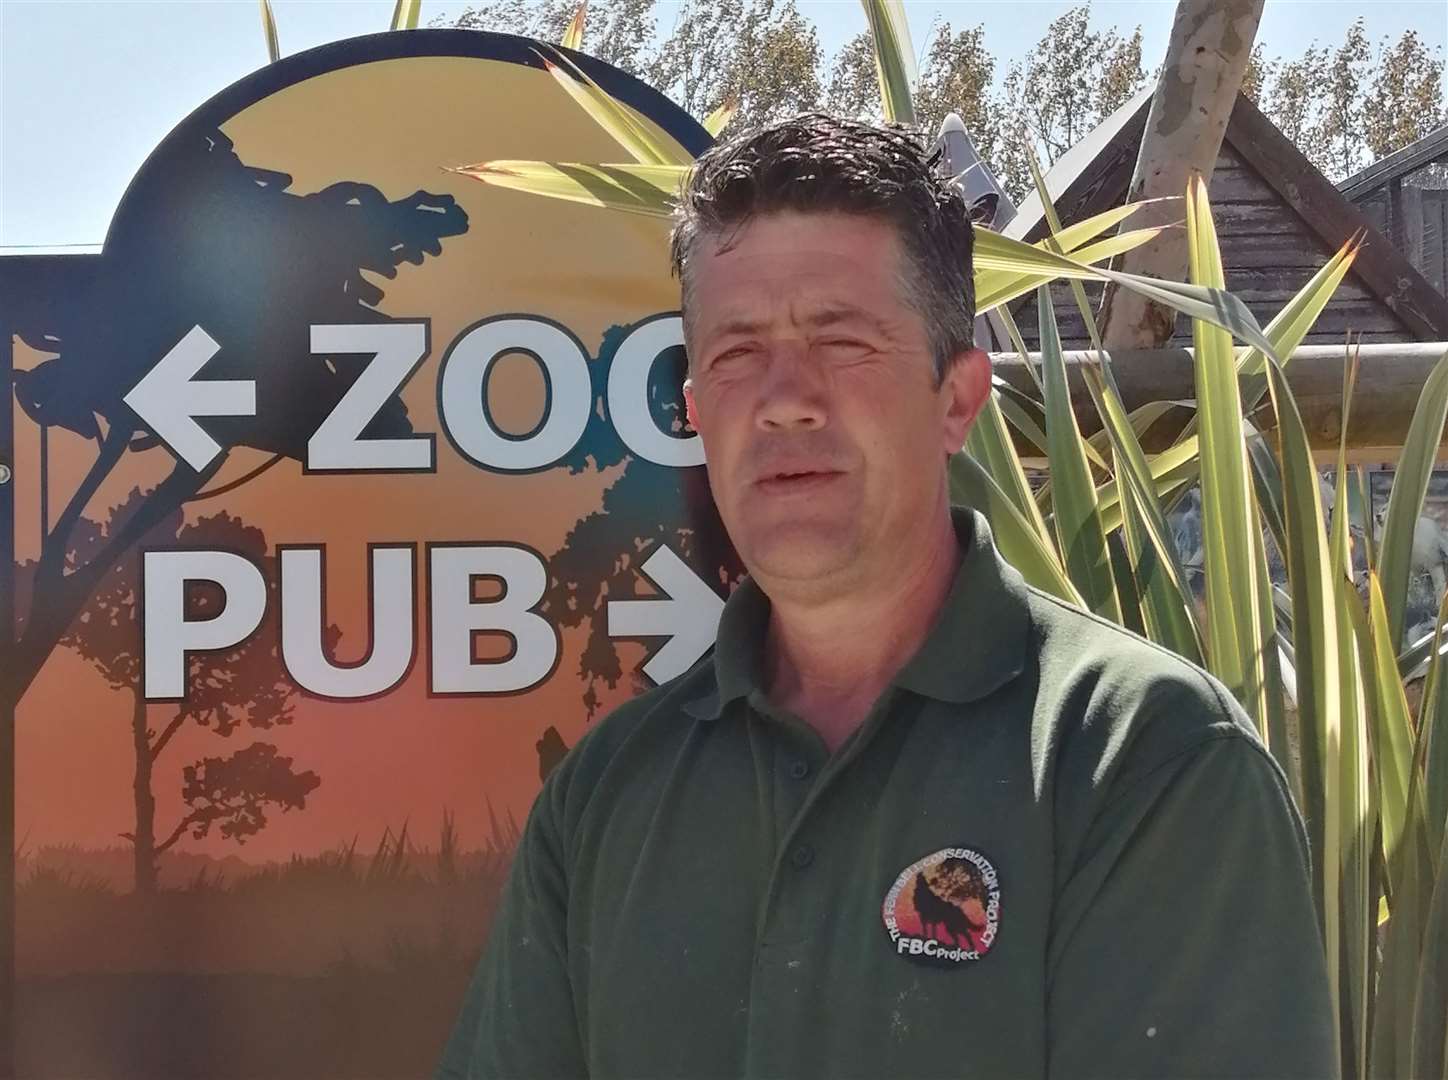 Andy Cowell, owner of The Fenn Bell Zoo and pub in St Mary Hoo, may have to euthanise his animals if the zoo can't raise the funds to feed them